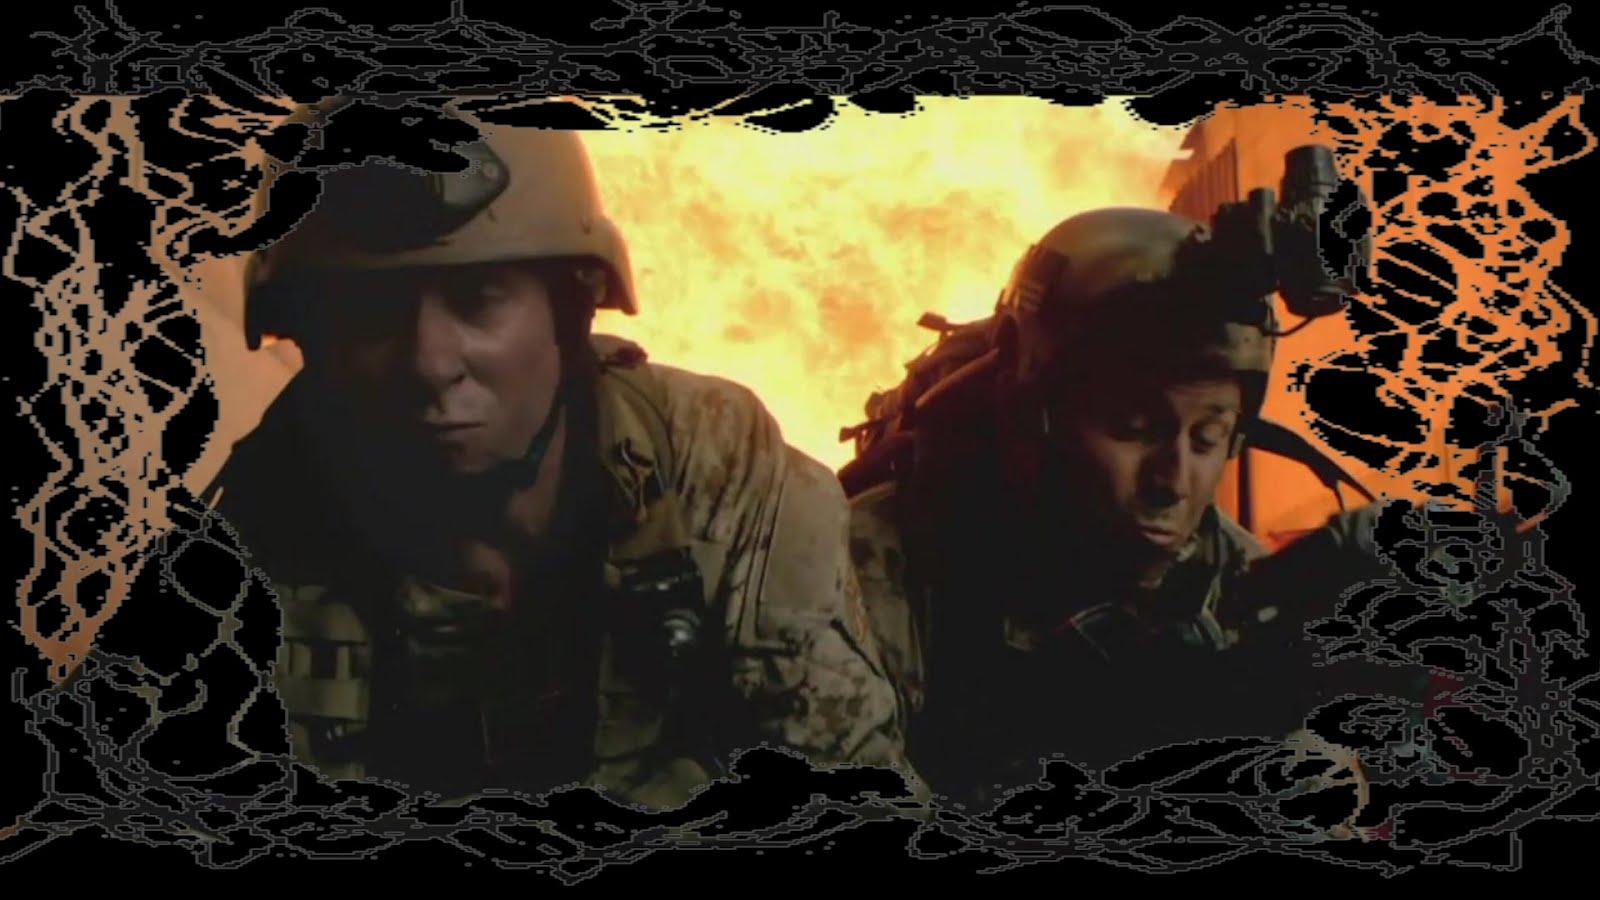 Act of Valor wallpaper, one facial expression. MoovieWatch!